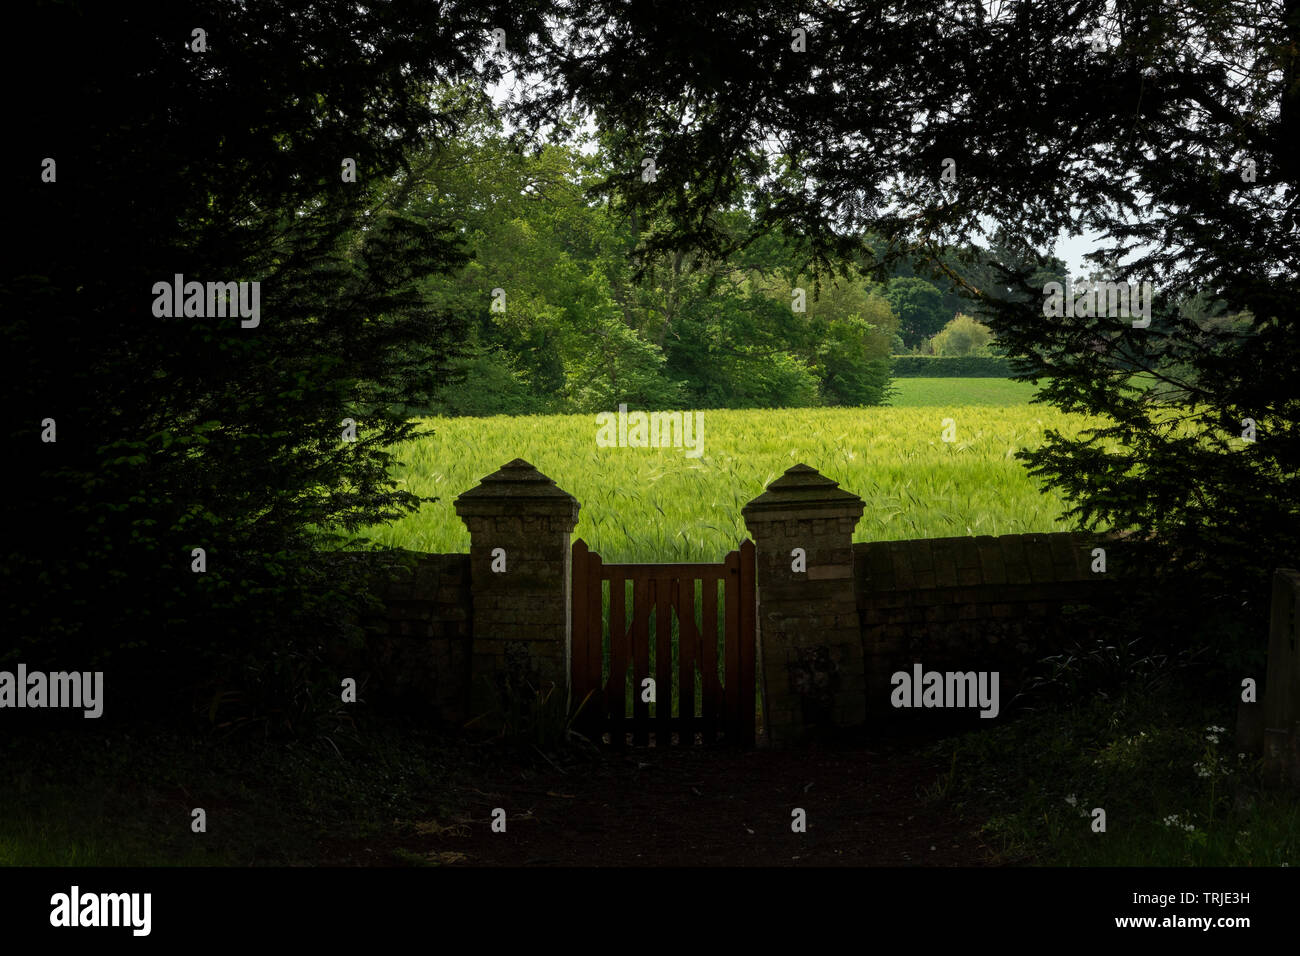 A small wooden gate in a stone wall surrounded by overhanging tress in heavy shade looking out onto an unripe field of barley Stock Photo